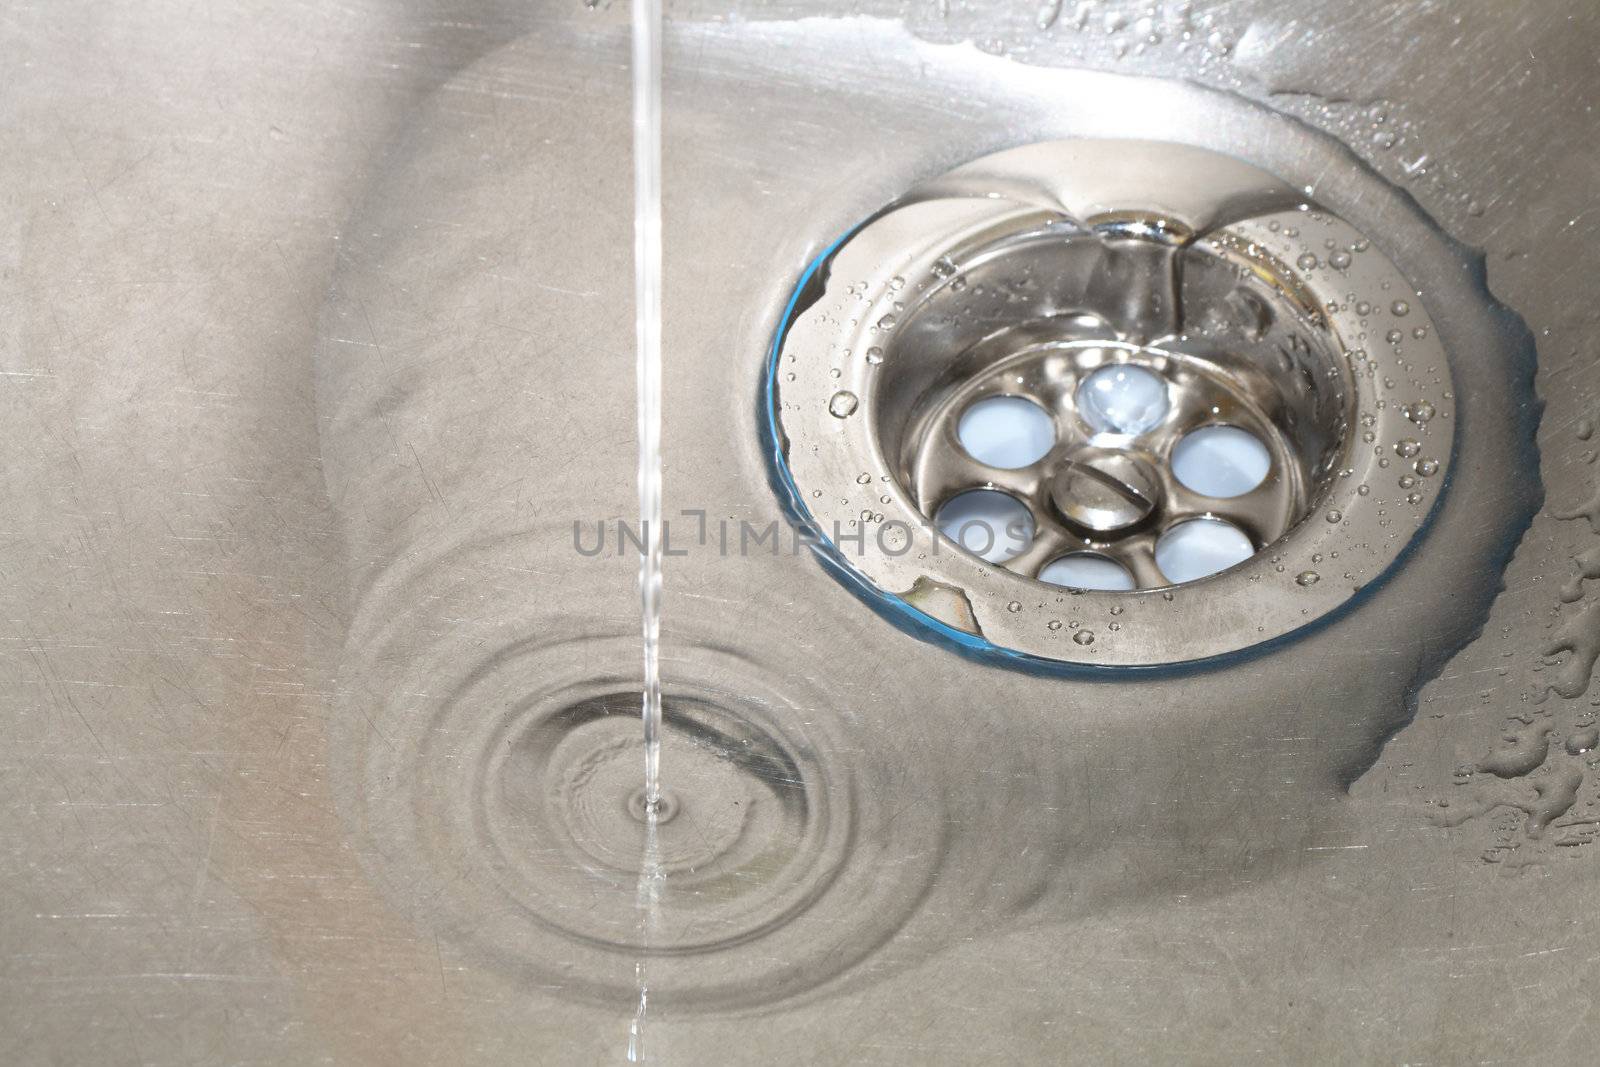 Closeup of gray stainless steel kitchen sink with water drops